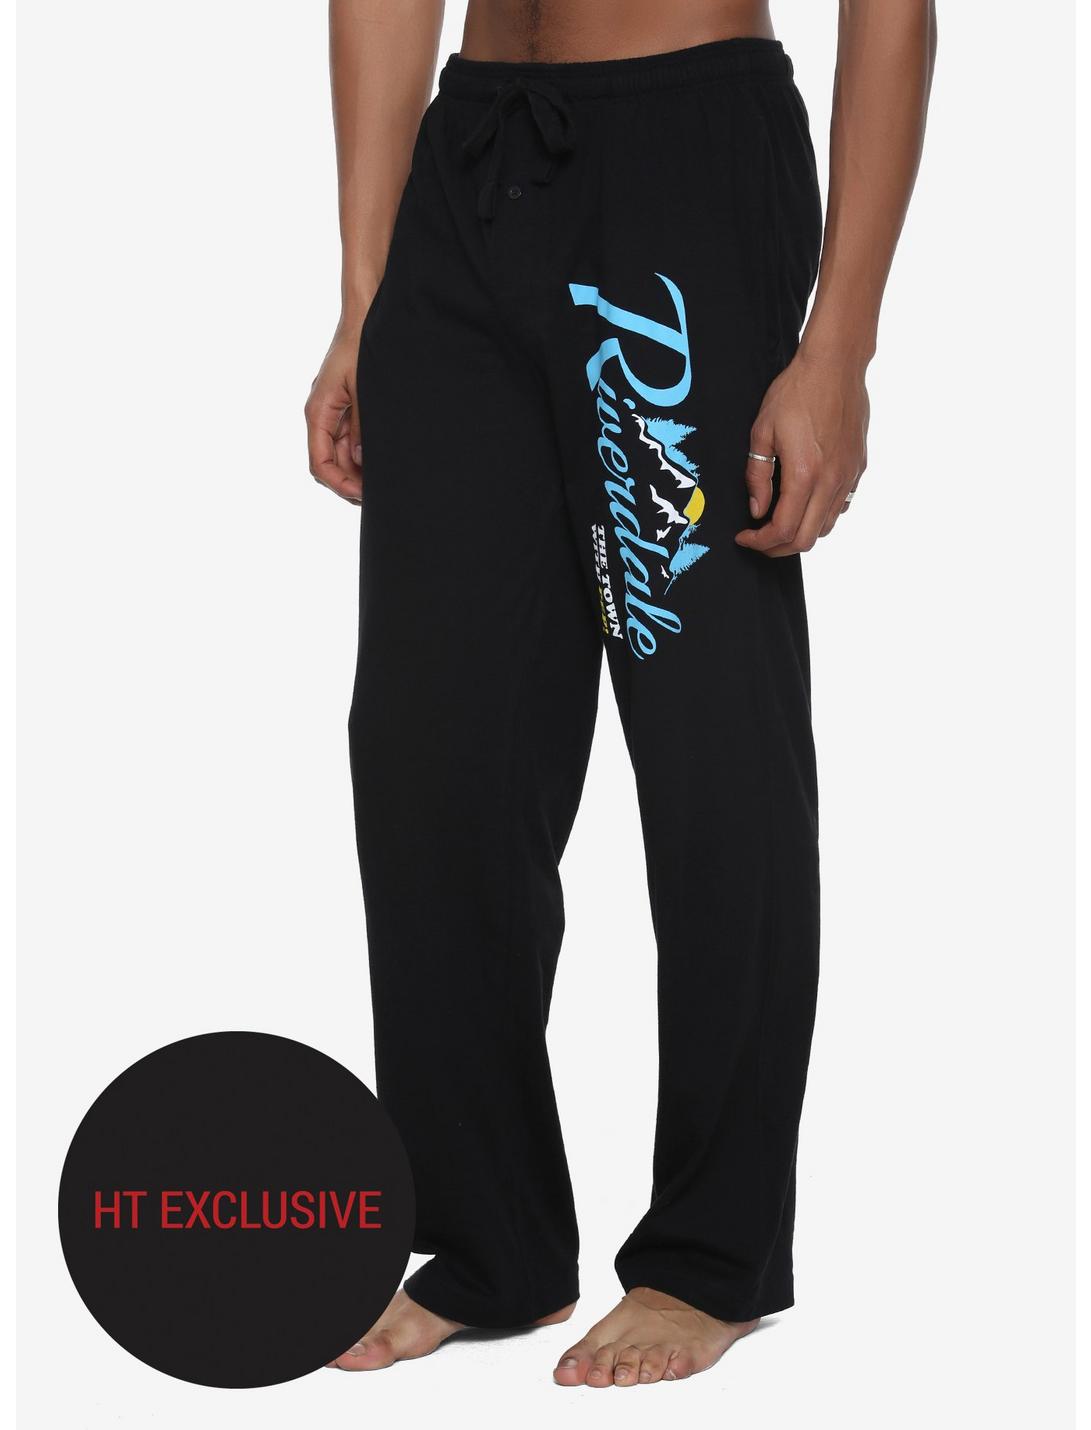 Riverdale Welcome To Riverdale Guys Pajama Pants Hot Topic Exclusive, BLACK, hi-res